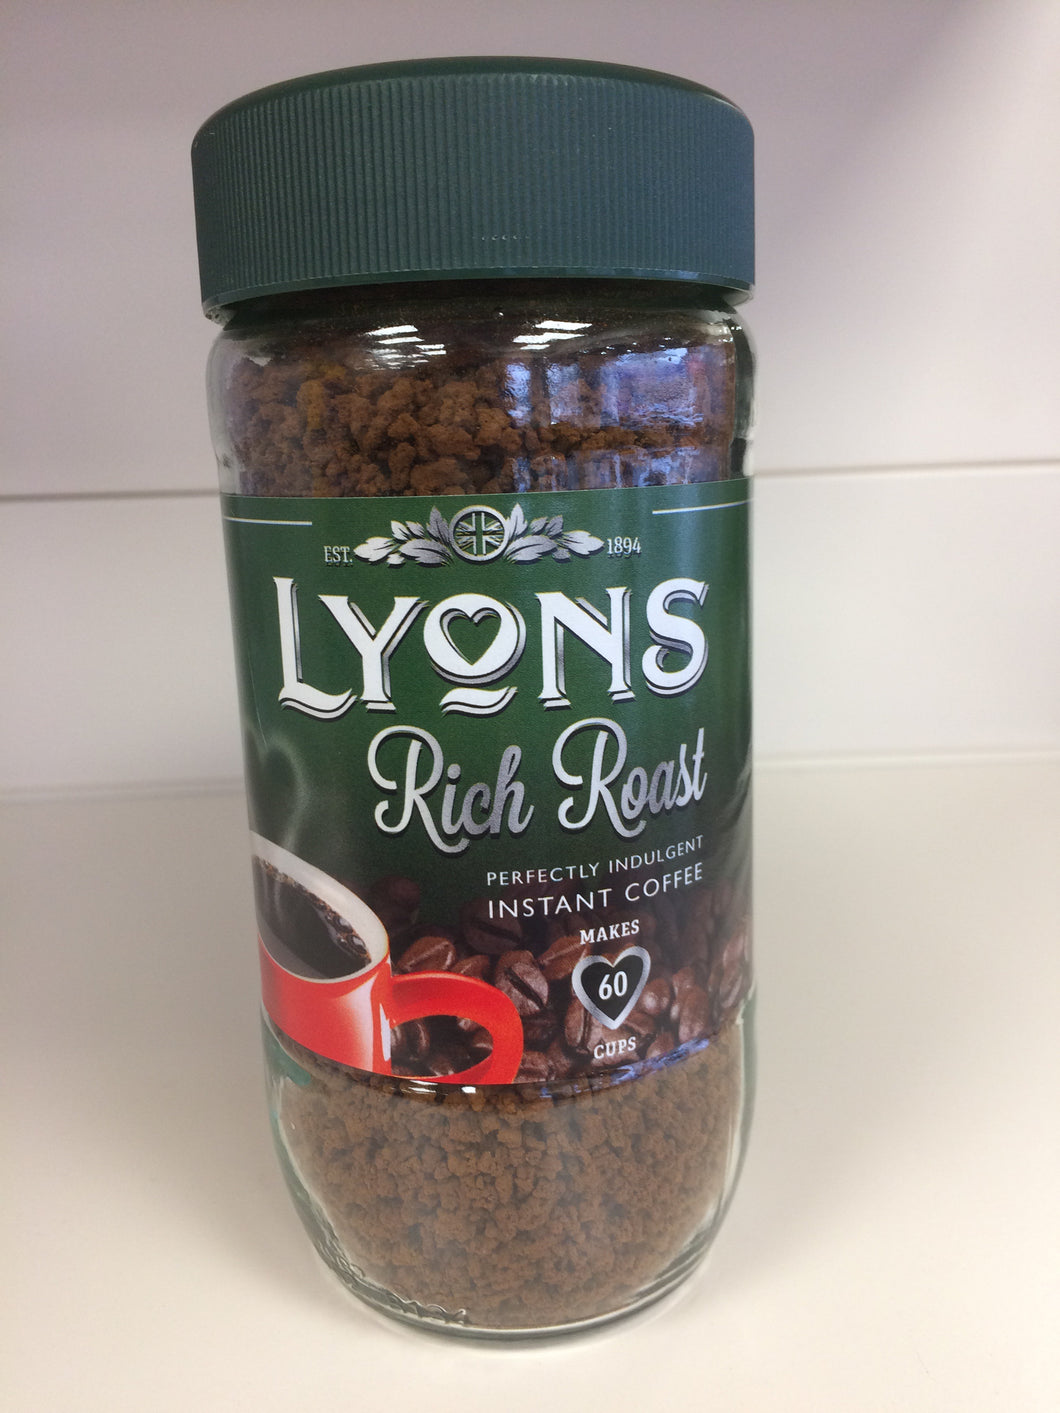 Lyons Rich Roast Instant Coffee 60 Cups 100g